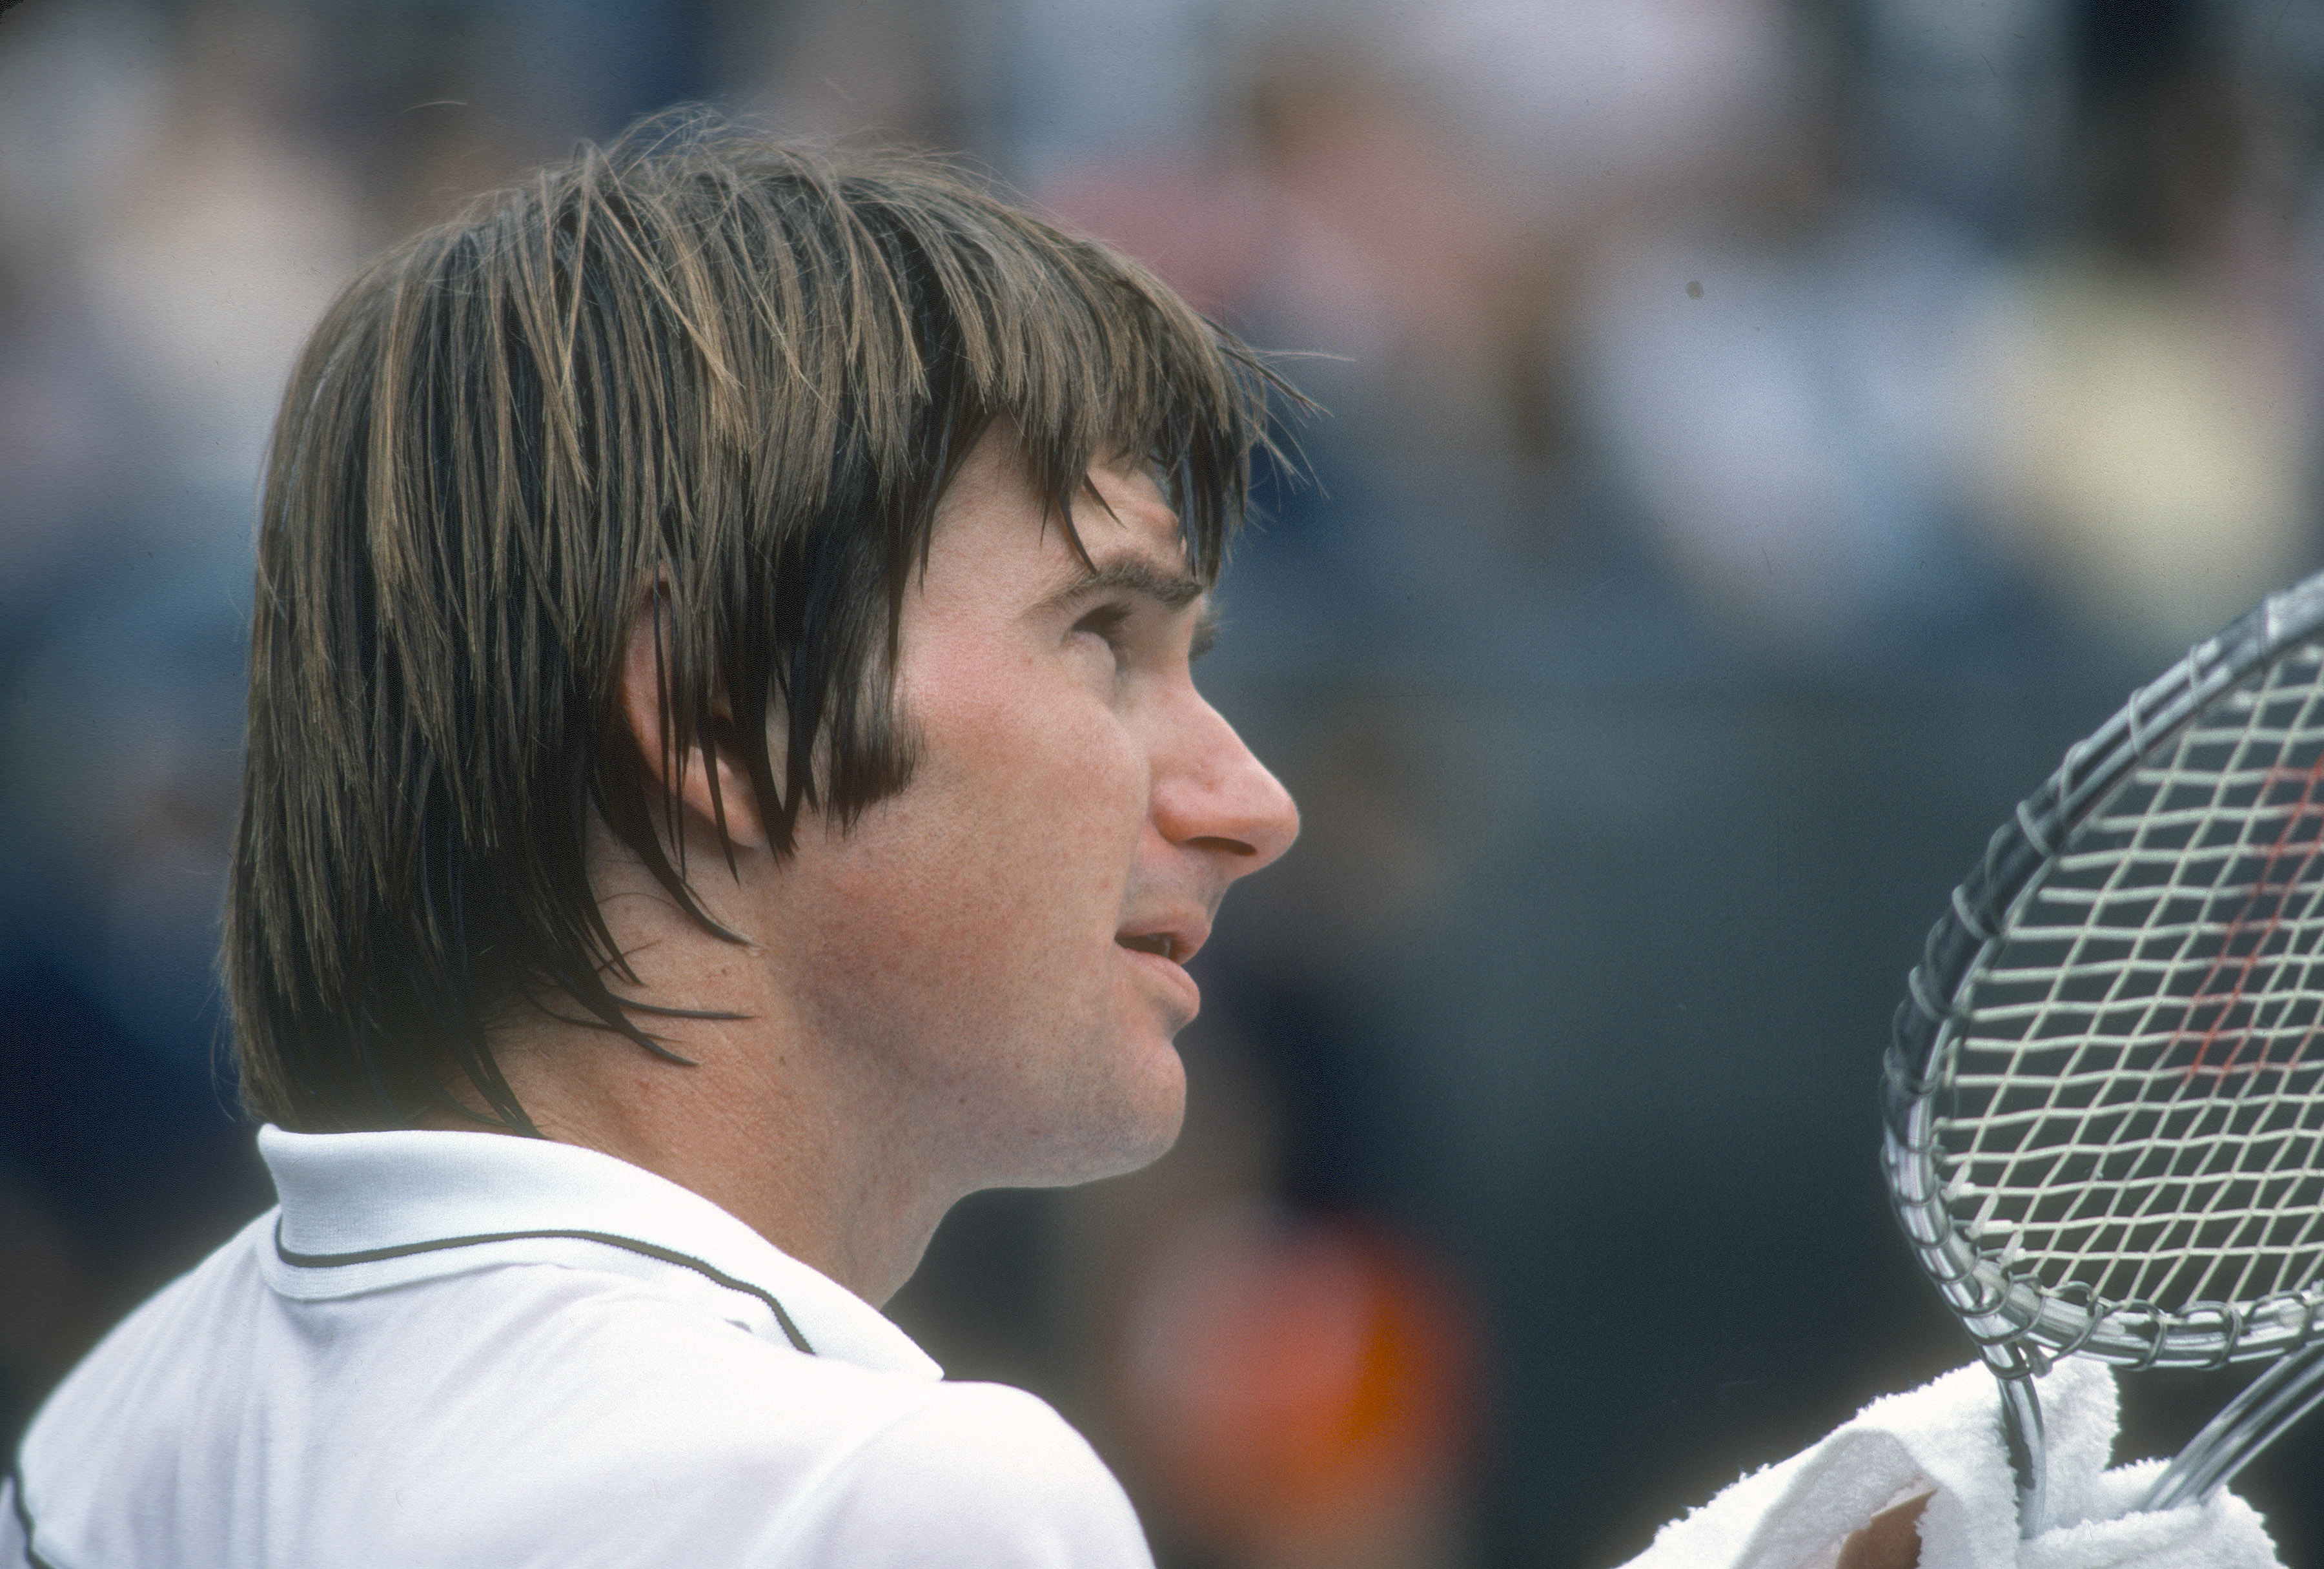 Jimmy Connors Recalls the Terrifying Moment His Mom Got Beaten Up at a Public Tennis Court